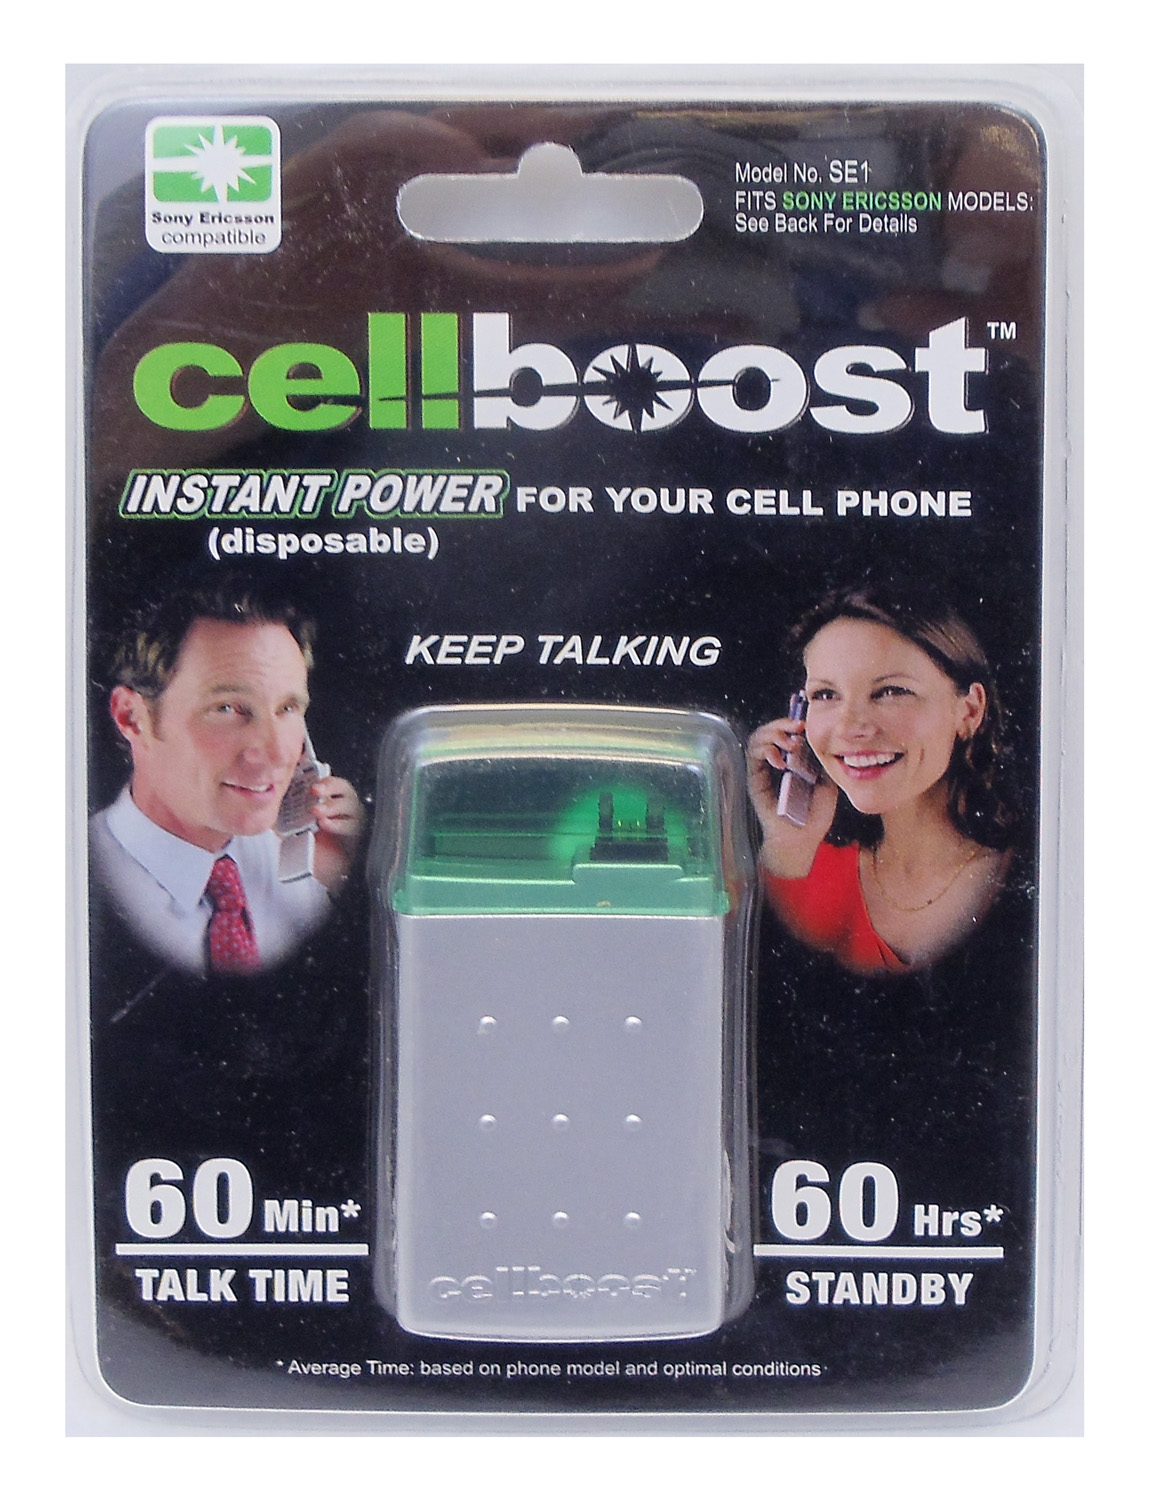 Cellboost - Provides Instant Power Up To 60 Minutes Talk Time & 60 Hours Standby For Sony Ericsson Phones